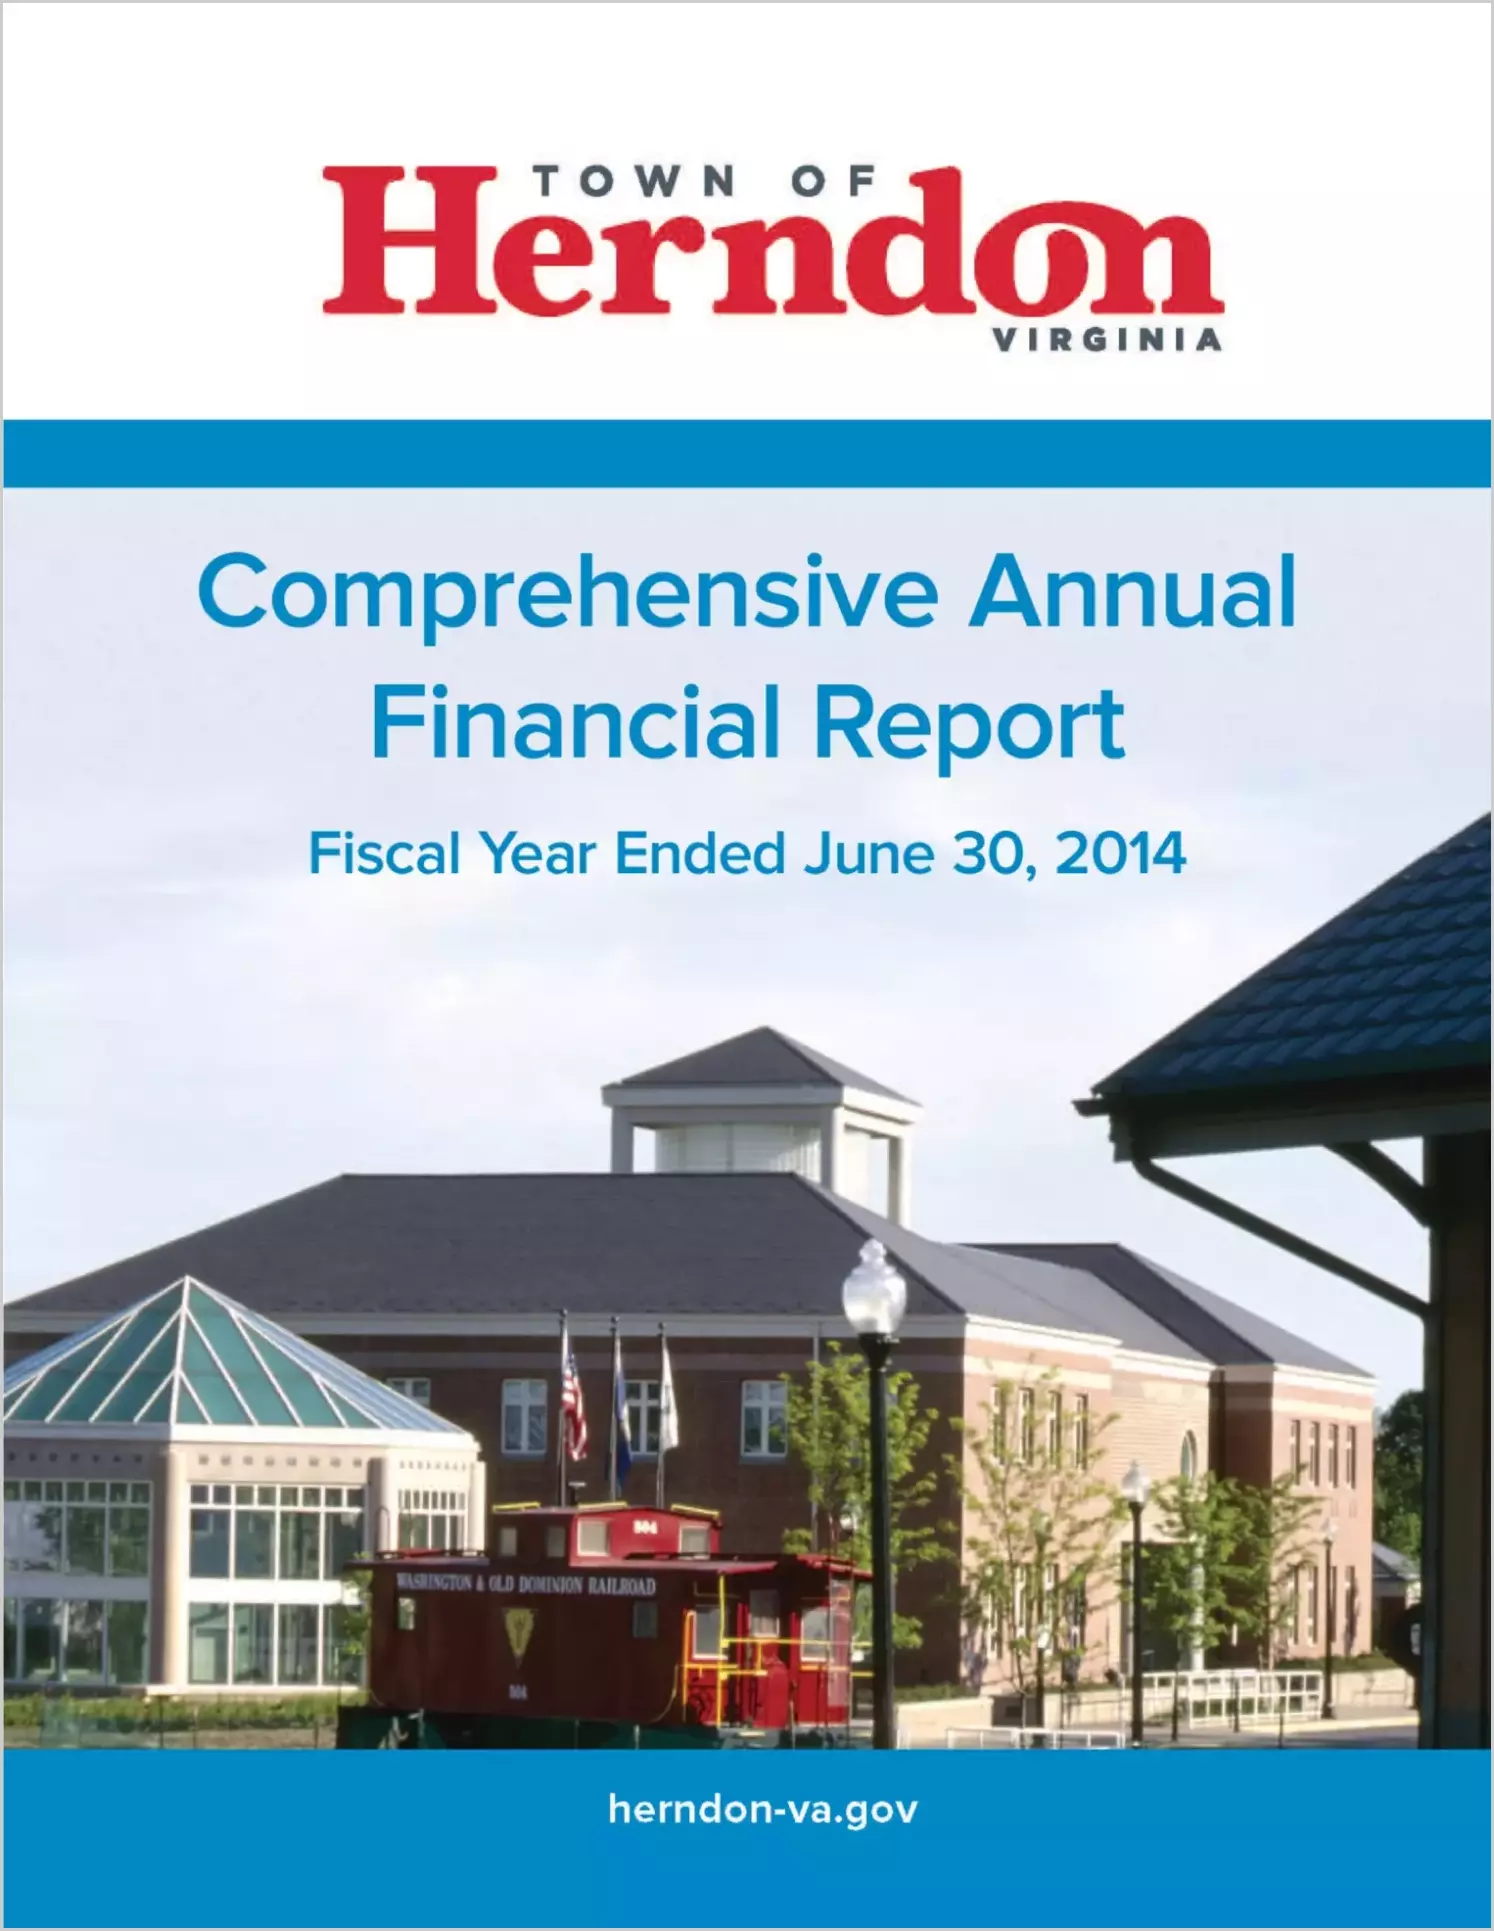 2014 Annual Financial Report for Town of Herndon